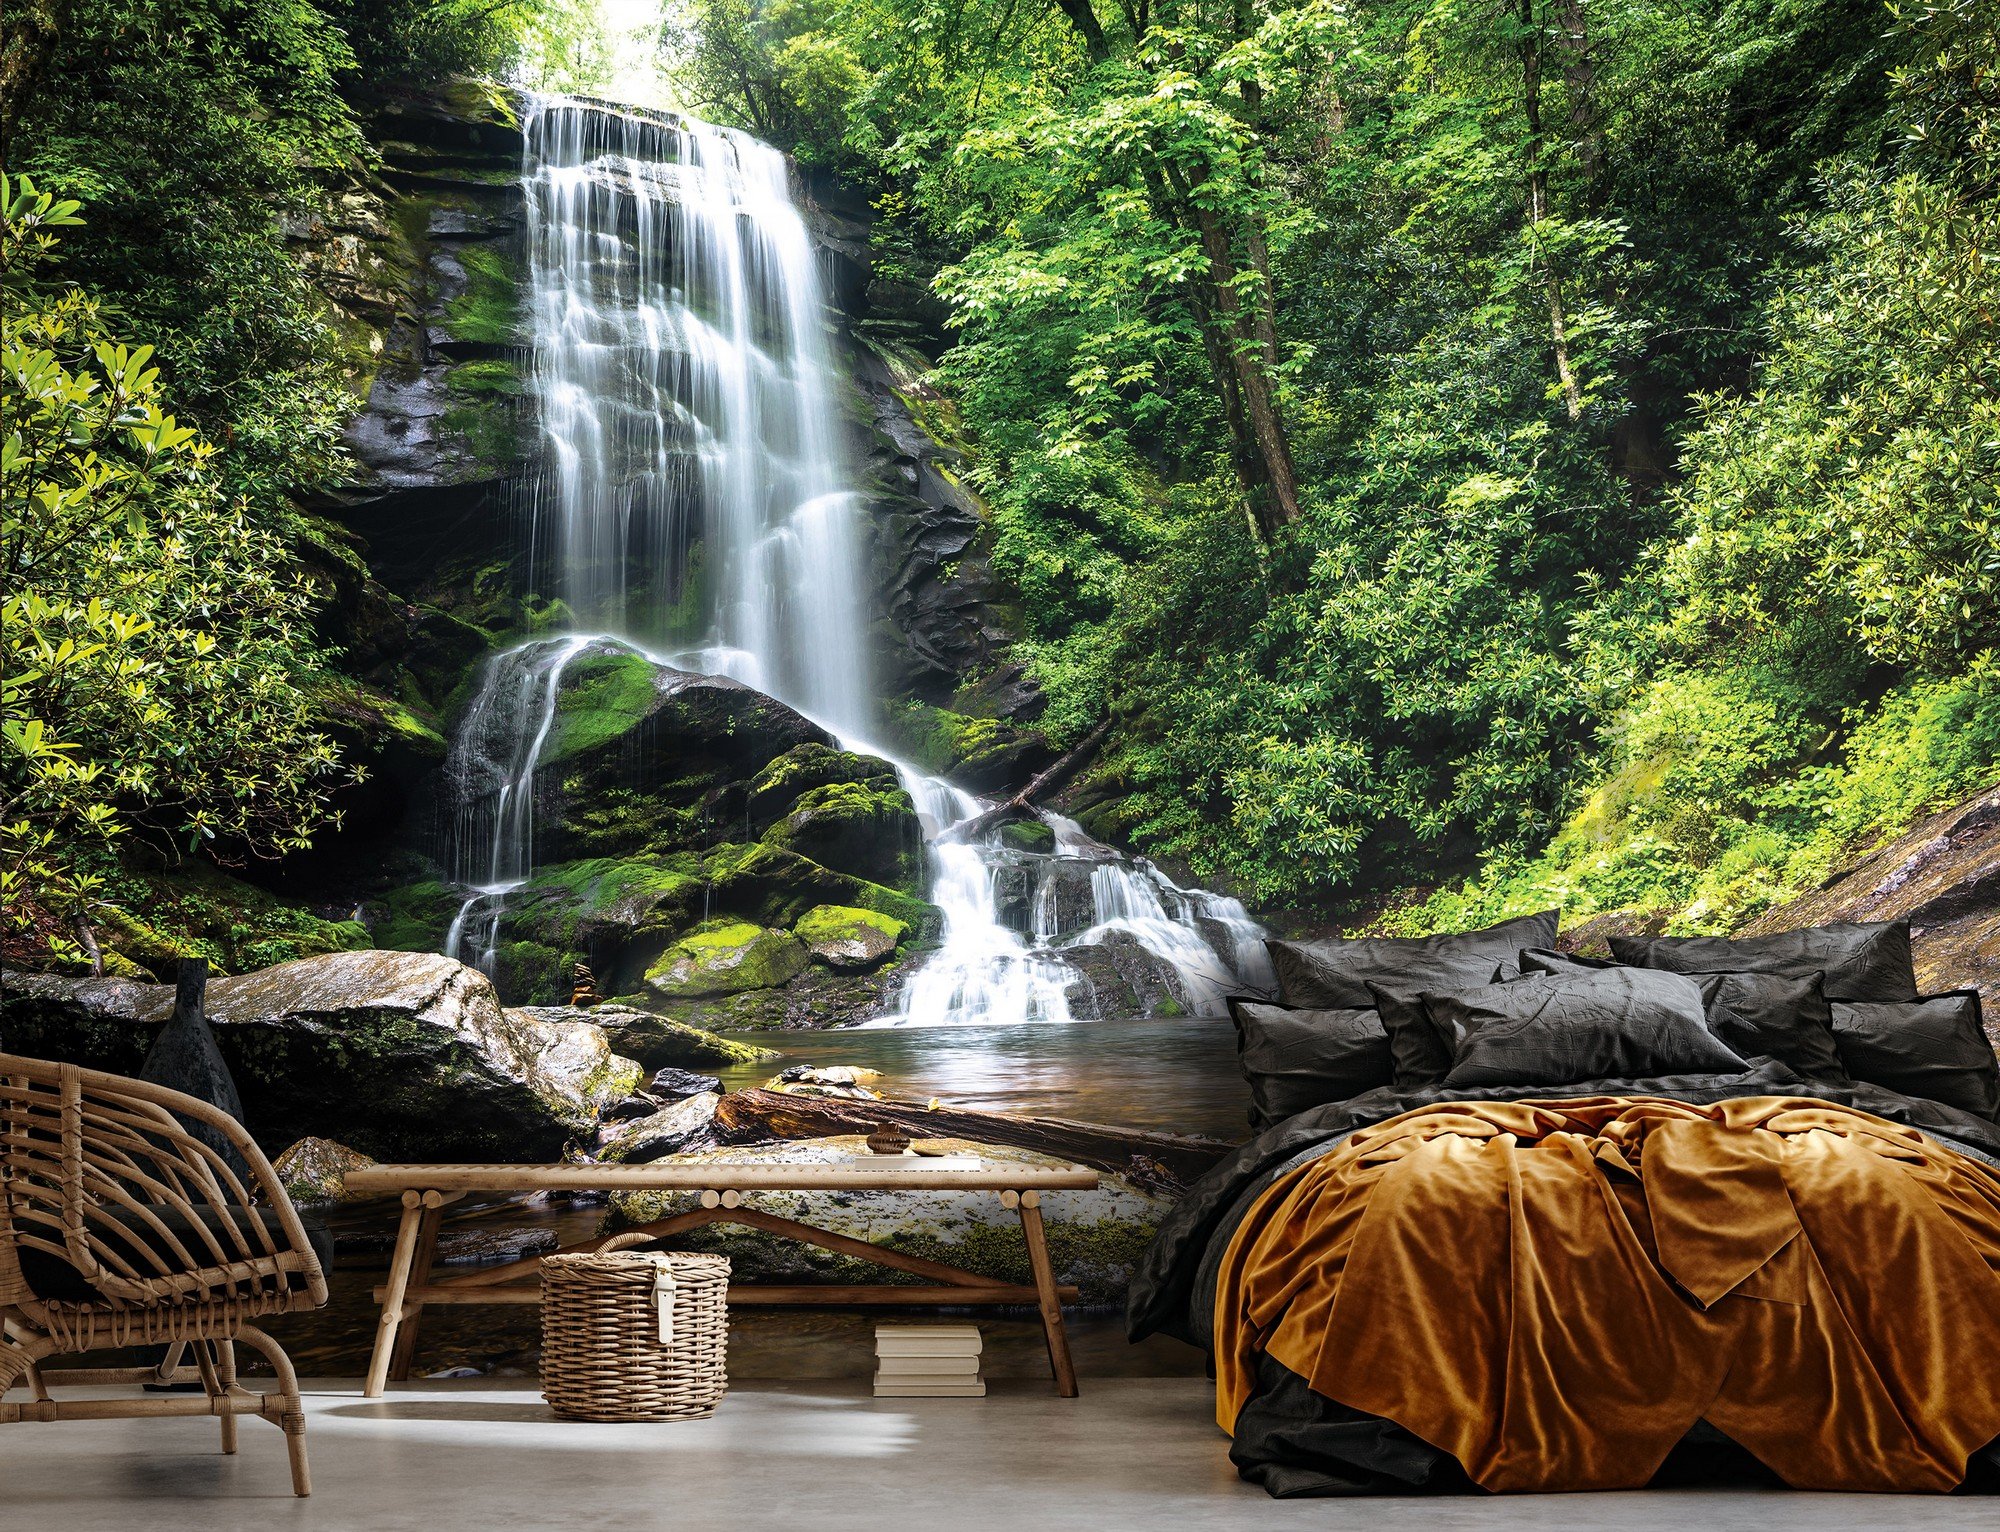 Wall mural vlies: White waterfall in the forest - 254x184 cm